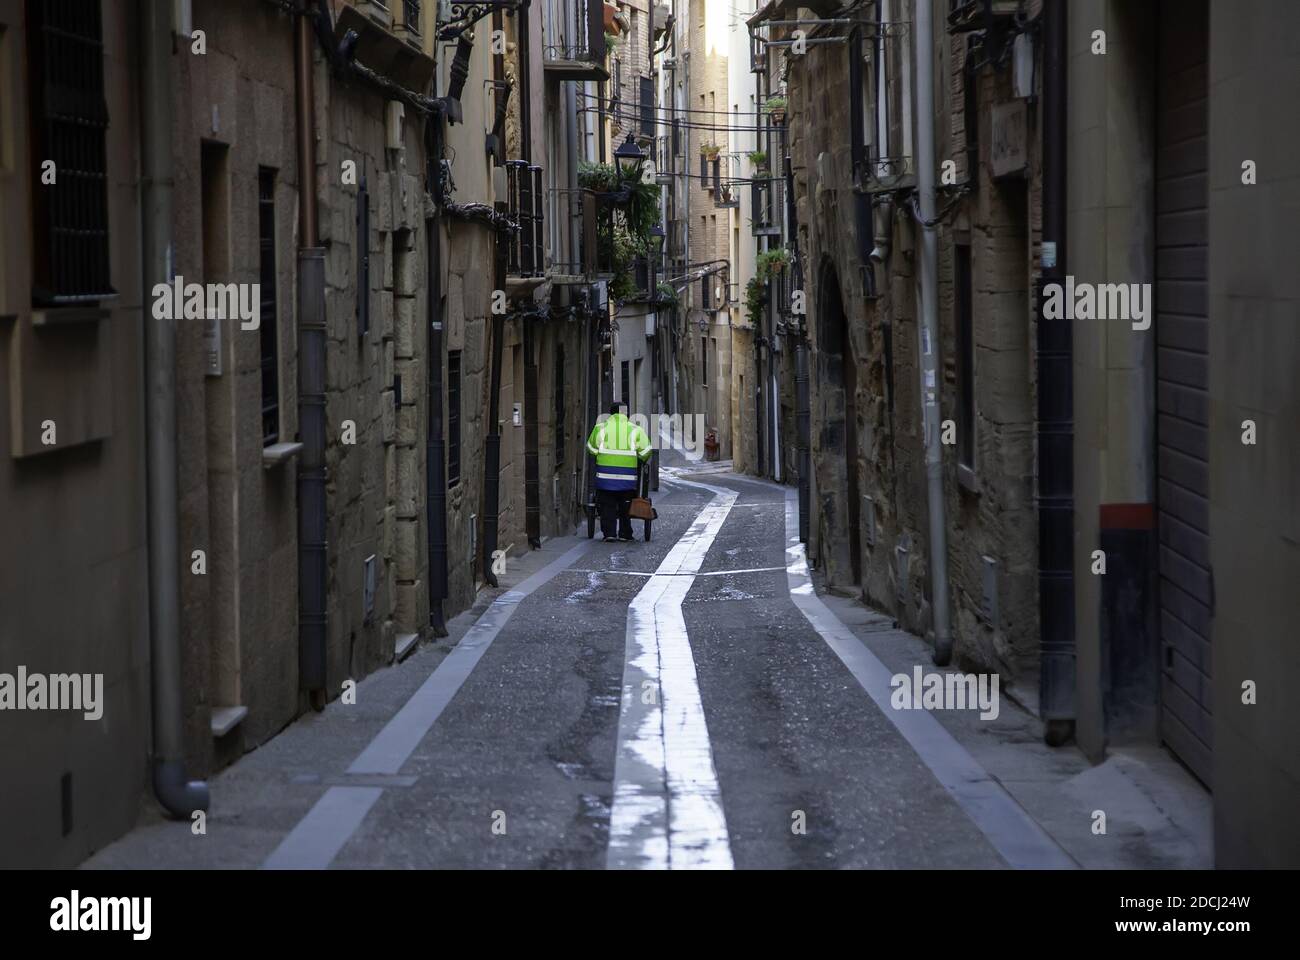 Street sweeper working, cleaning and disinfecting the city Stock Photo